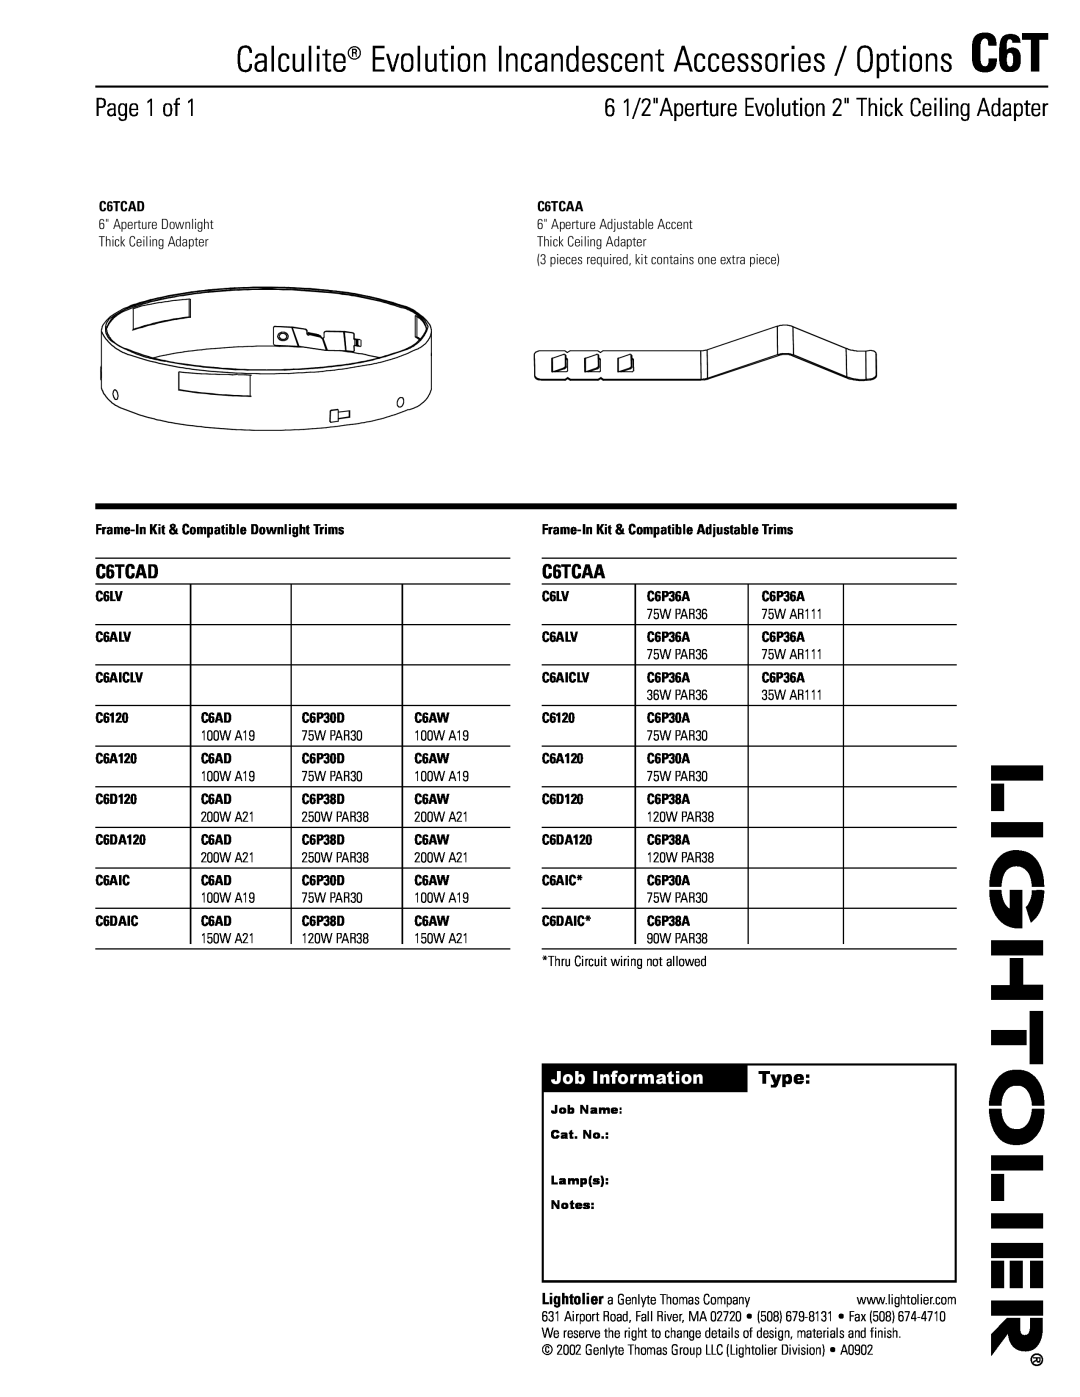 Lightolier manual Page 1 of, 6 1/2Aperture Evolution 2 Thick Ceiling Adapter, C6TCAD, C6TCAA, Job Information, Type 